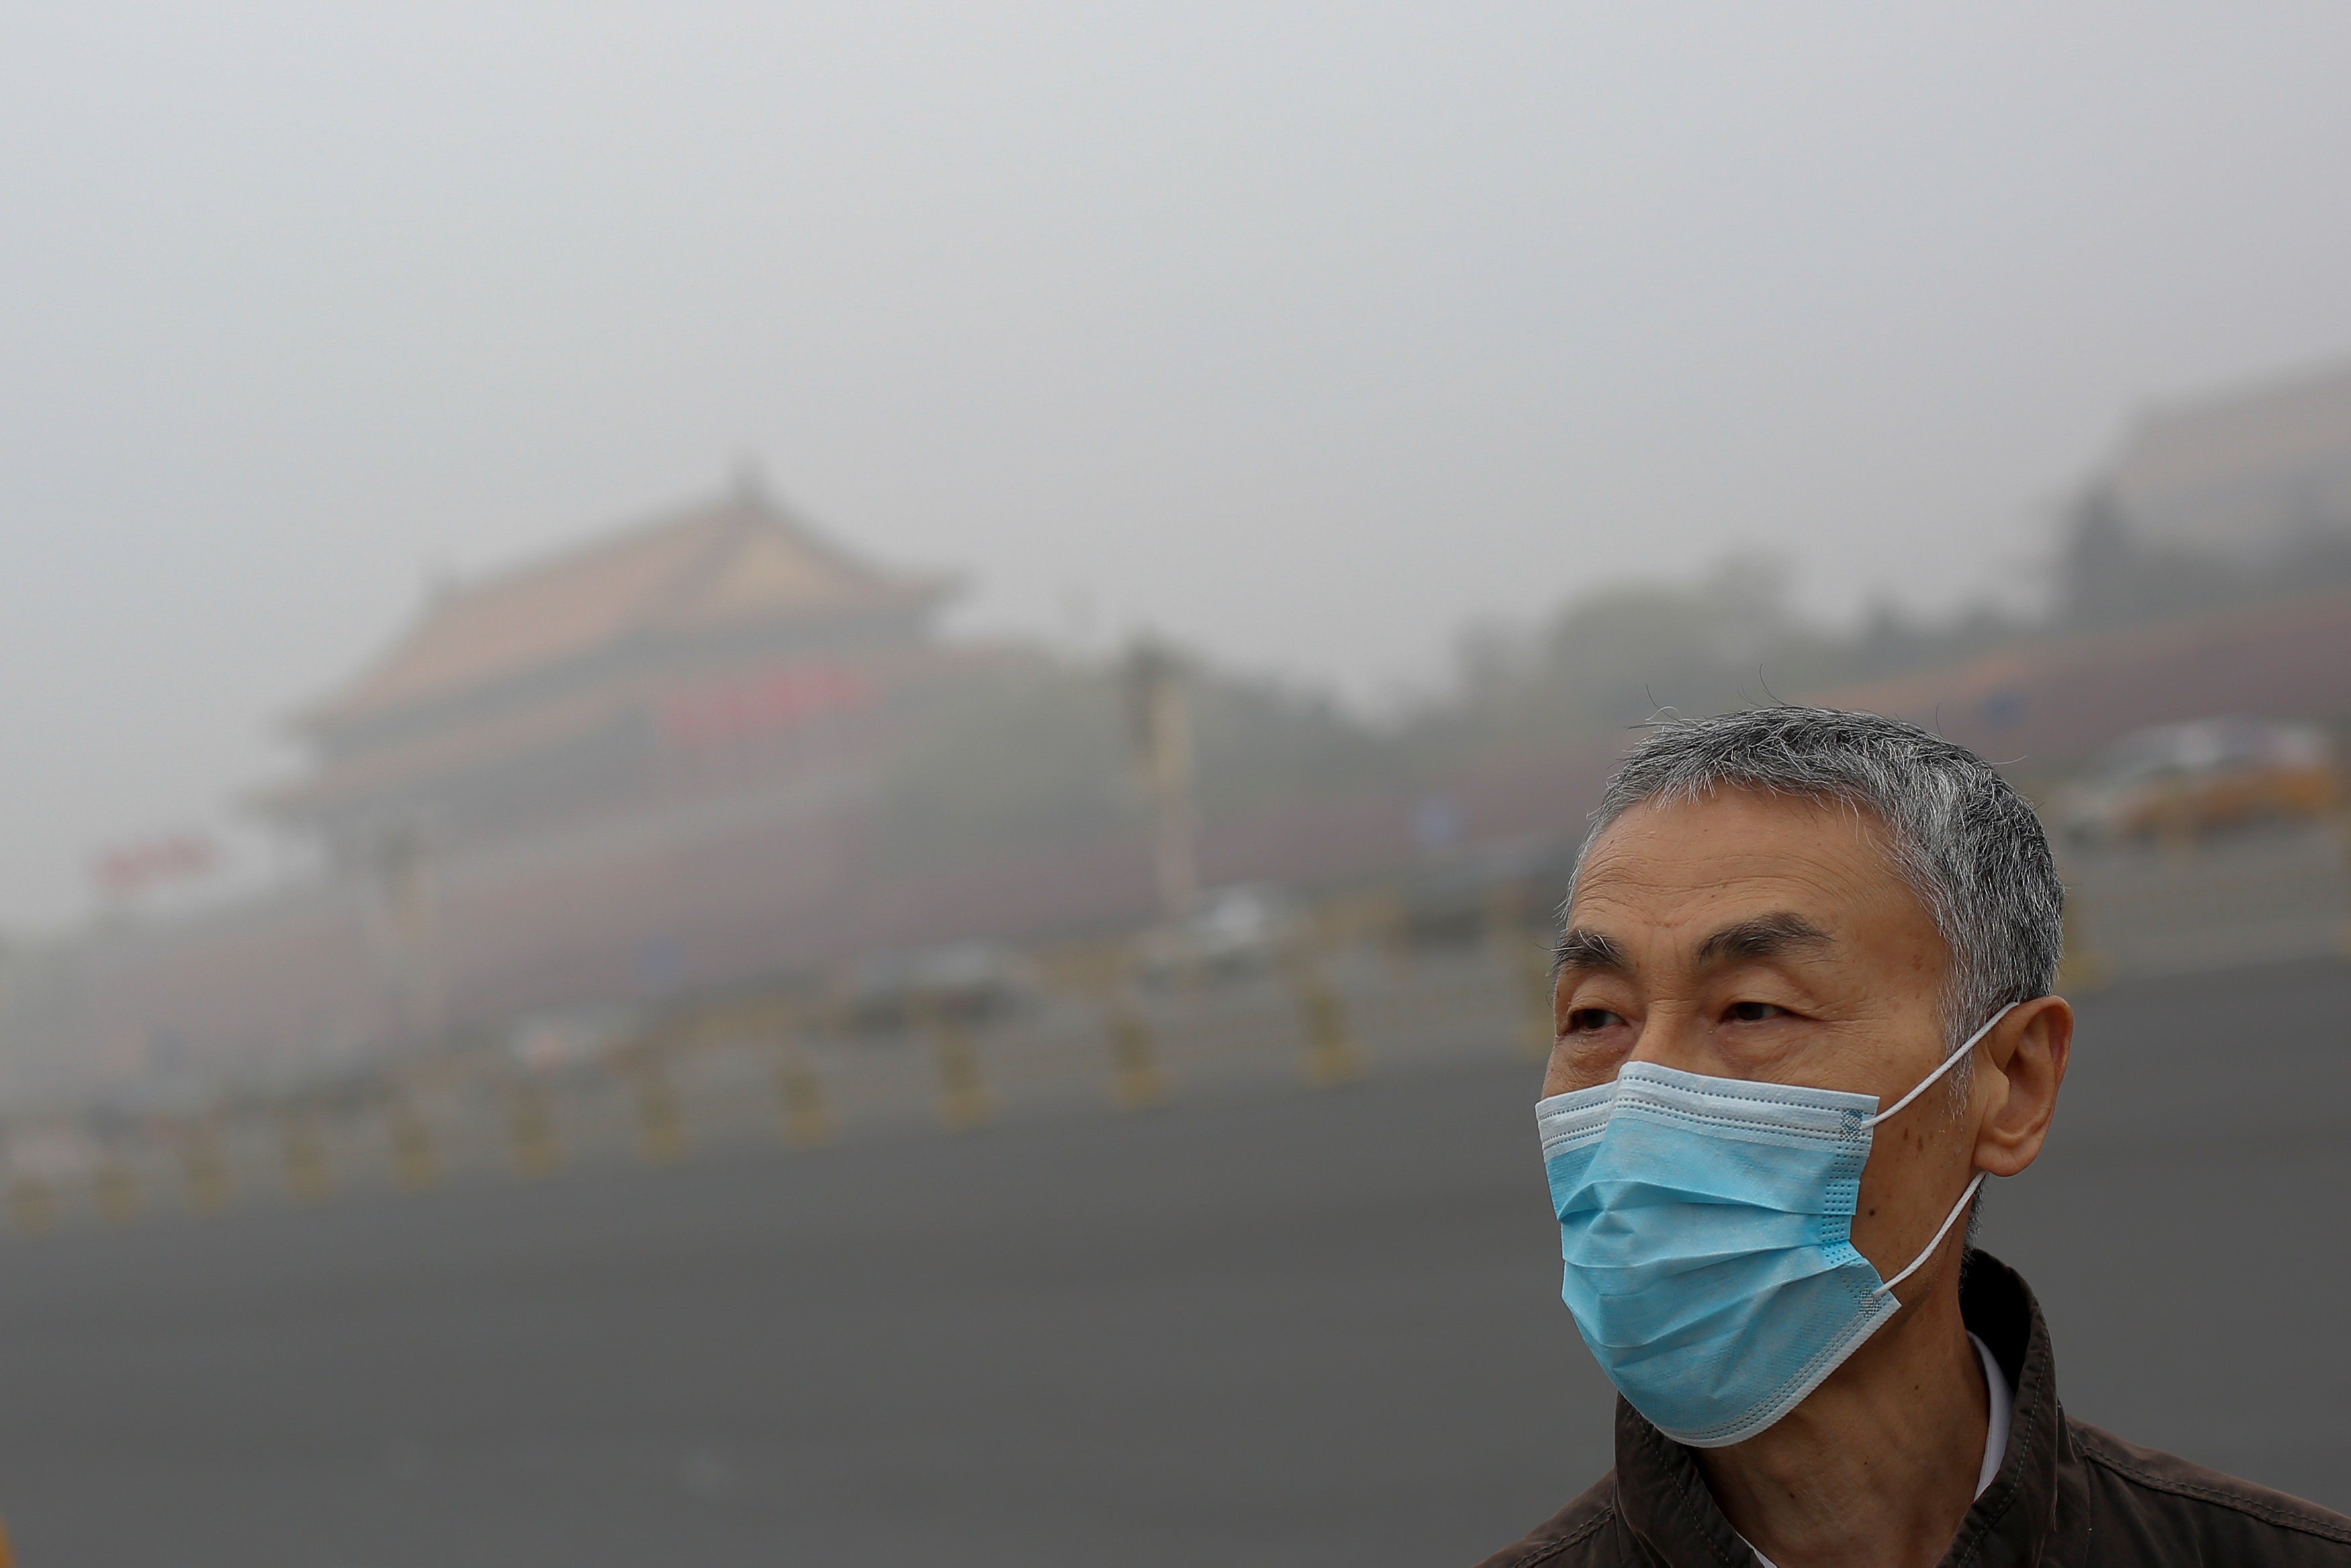 A man wears a mask as Tiananmen Square is shrouded in haze after a yellow alert was issued for smog in Beijing on November 14, 2018. Photo: Reuters